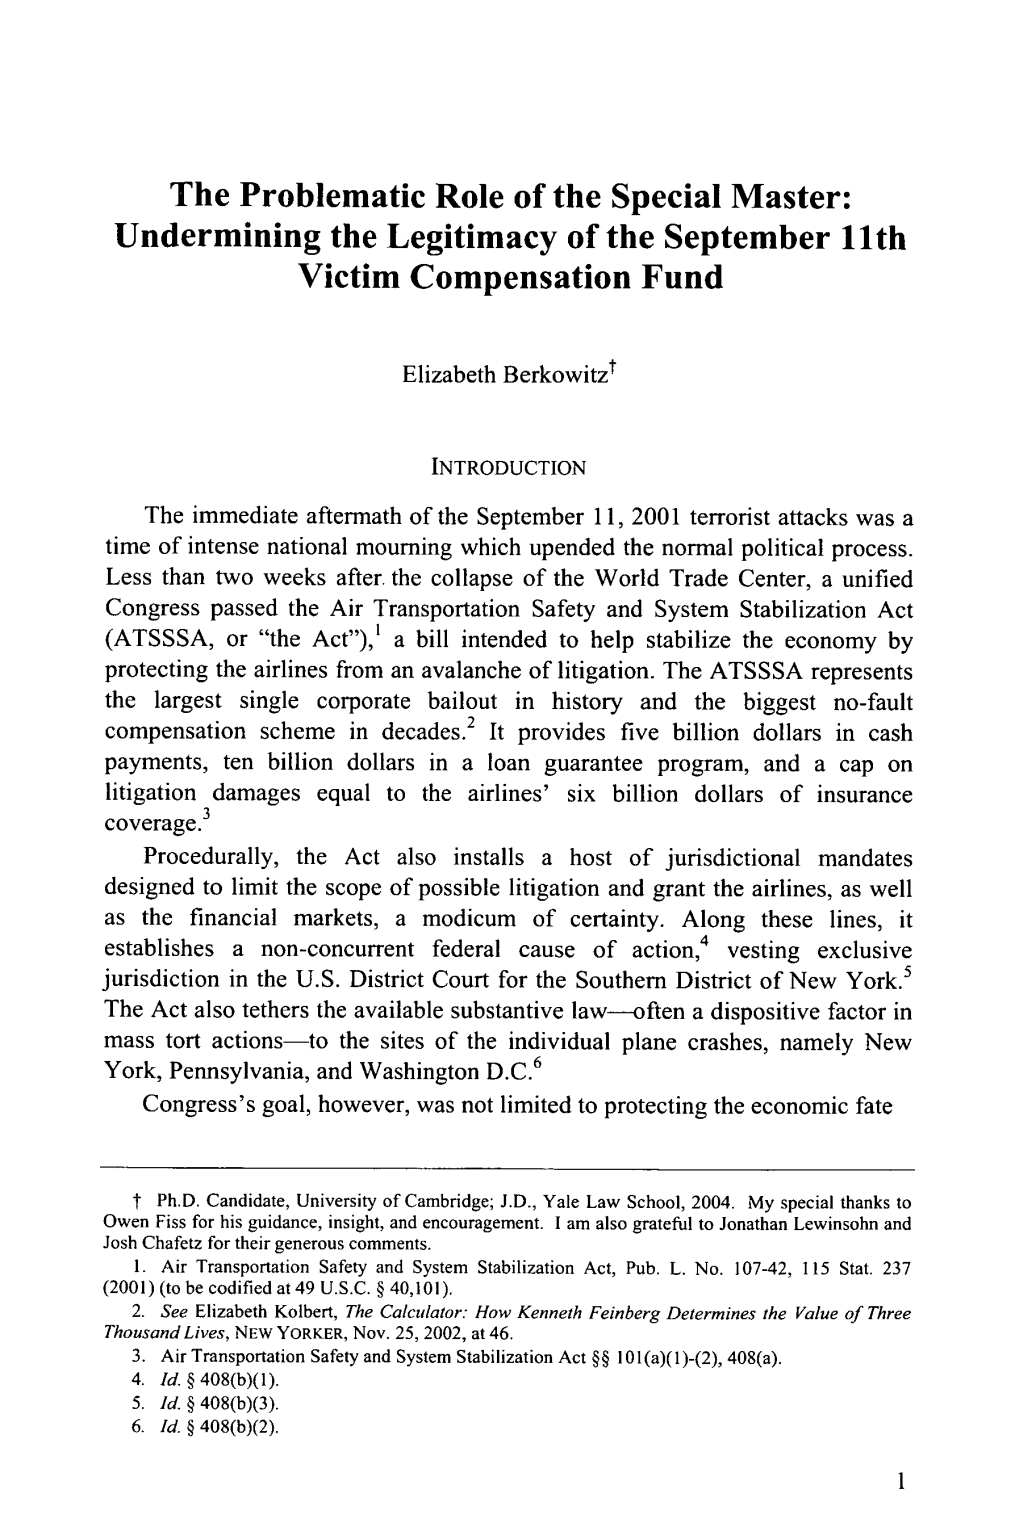 Undermining the Legitimacy of the September 11Th Victim Compensation Fund